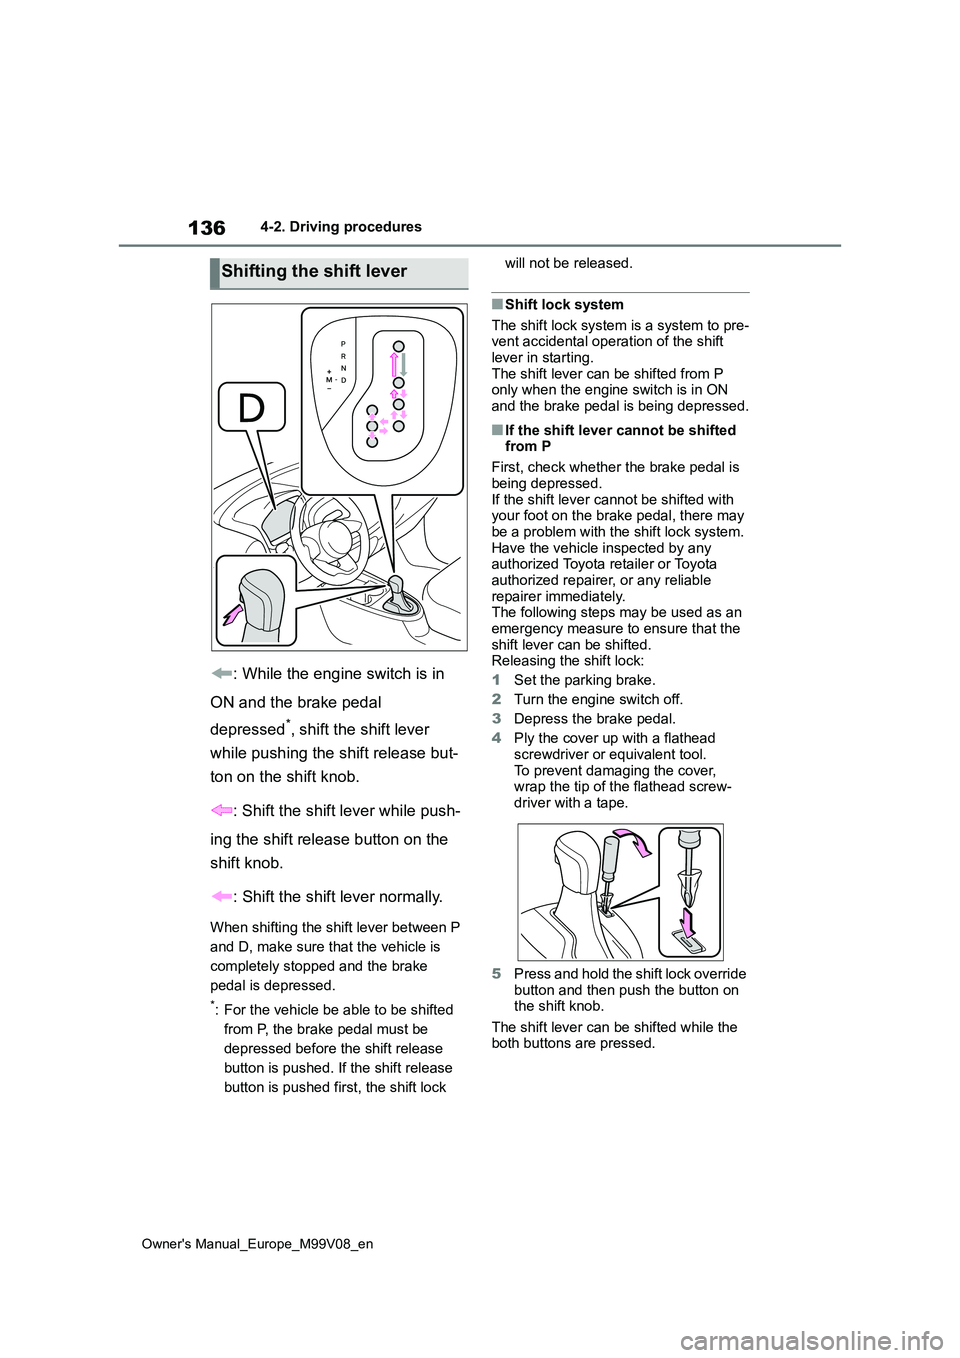 TOYOTA AYGO X 2022  Owners Manual (in English) 136
Owner's Manual_Europe_M99V08_en
4-2. Driving procedures
: While the engine switch is in  
ON and the brake pedal  
depressed*, shift the shift lever  
while pushing the shift release but-
ton 